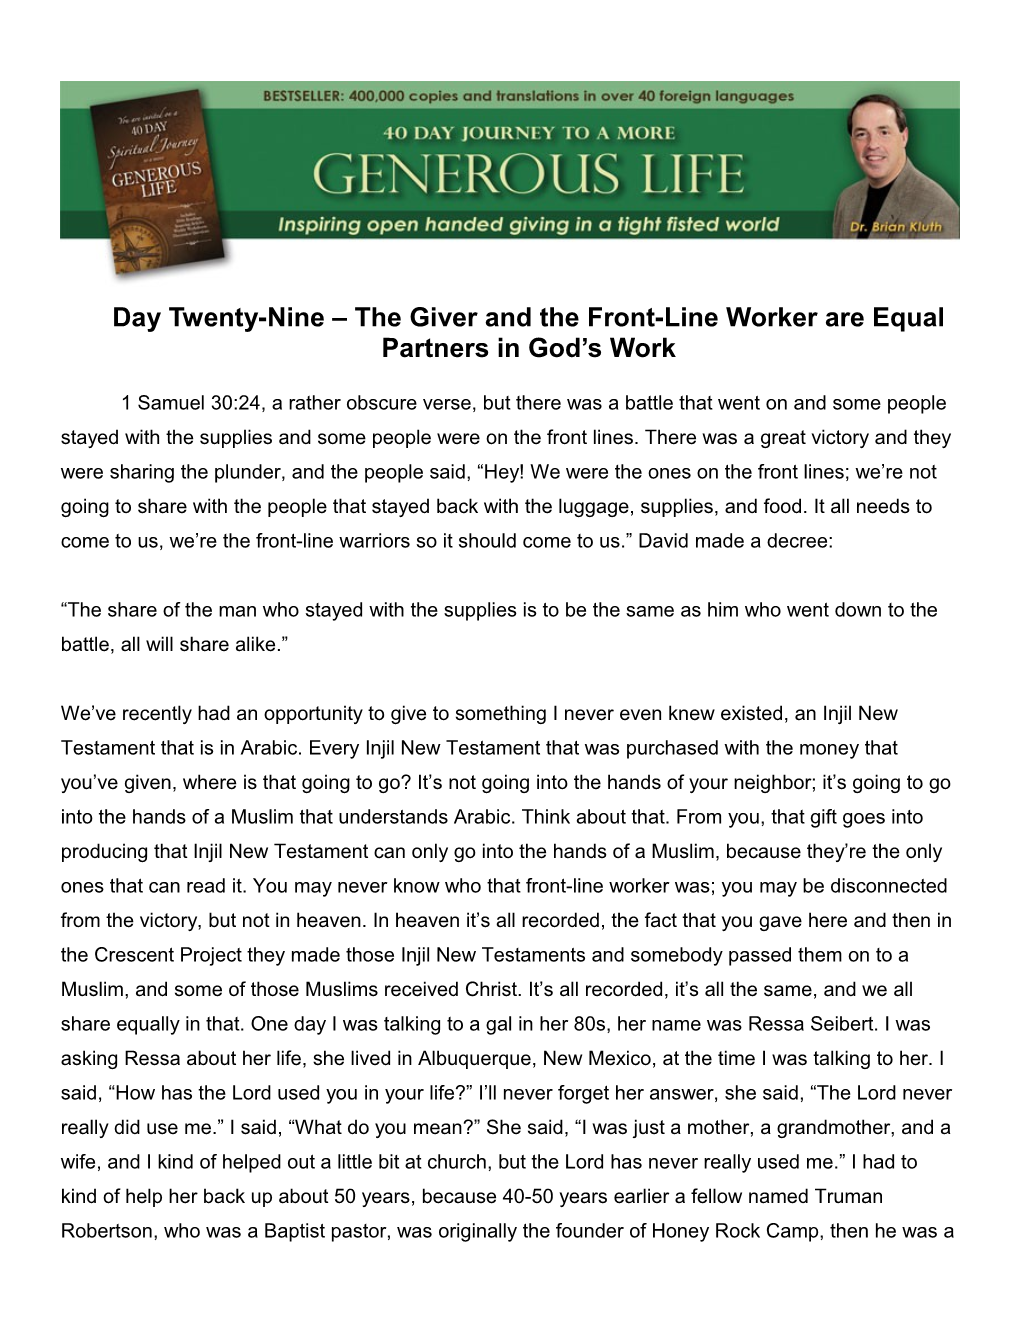 Day Twenty-Nine the Giver and the Front-Line Worker Are Equal Partners in God S Work